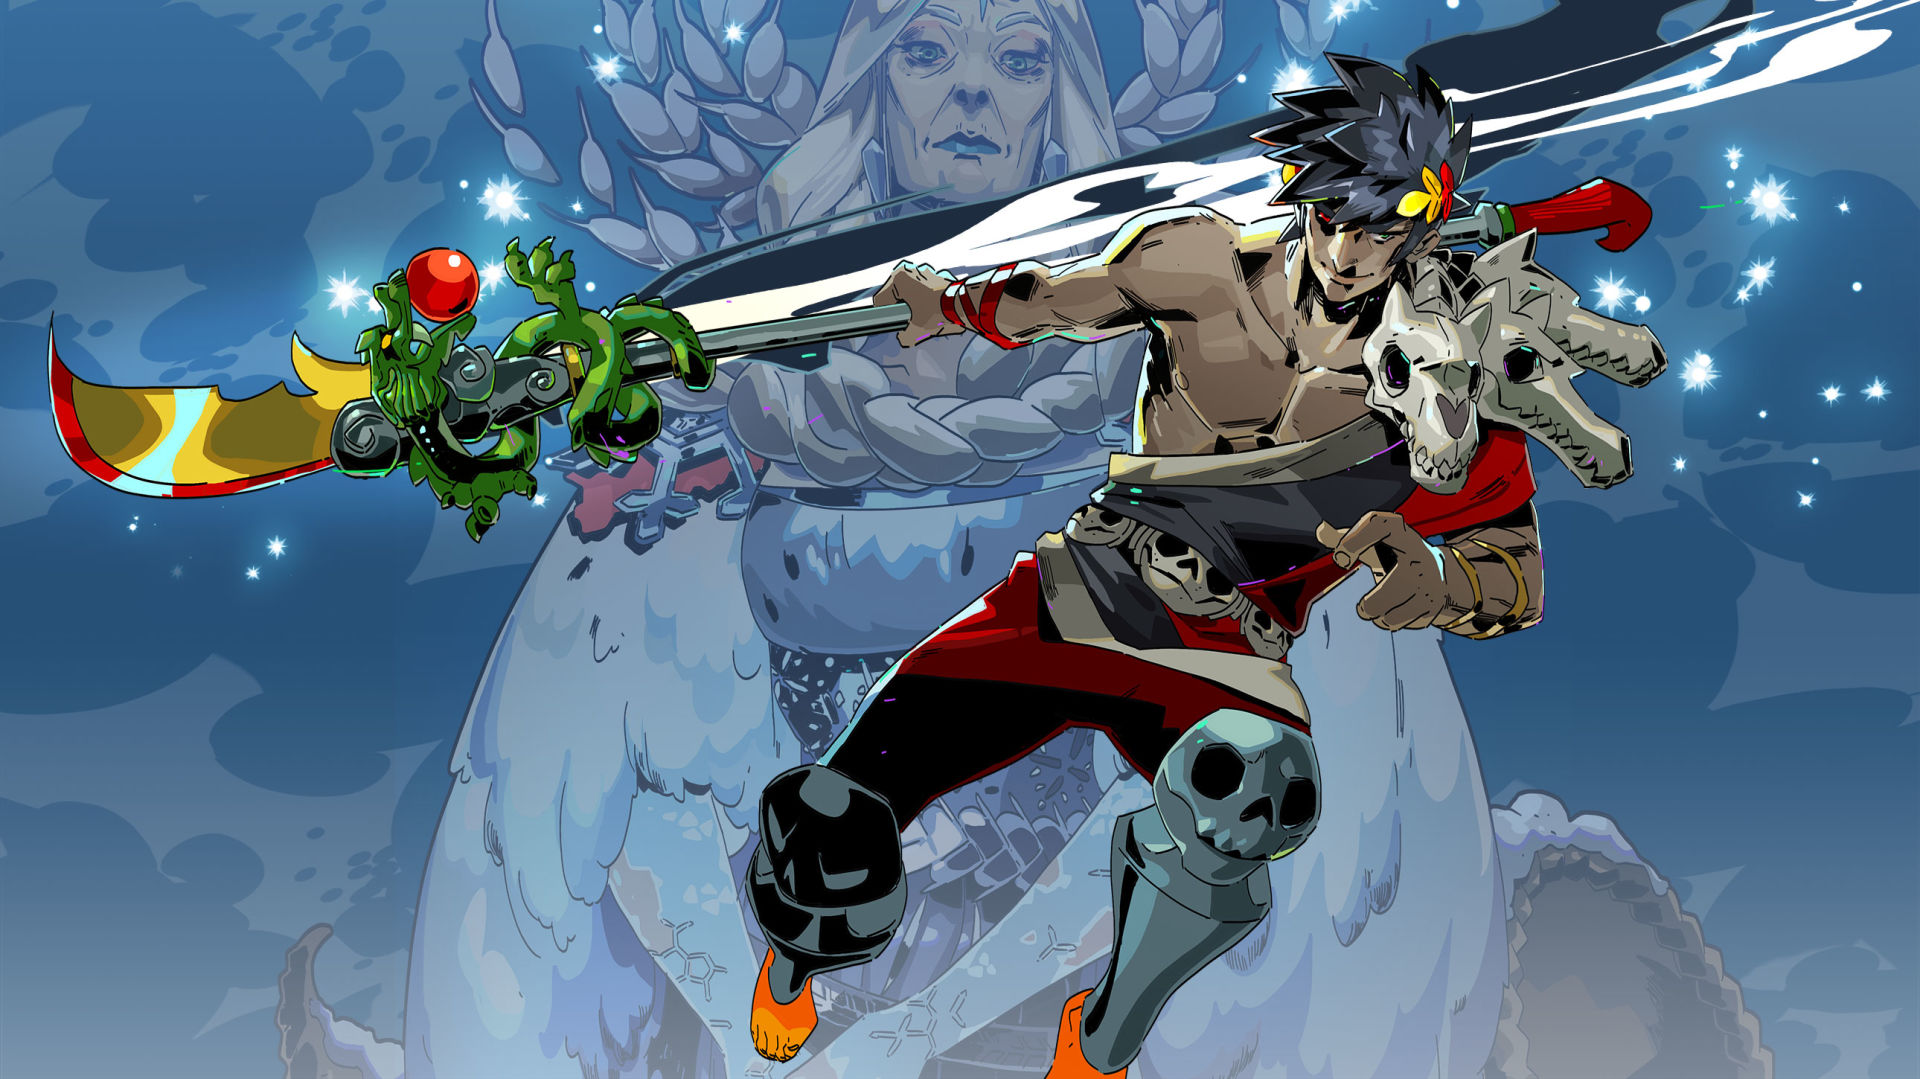 Varatha, The Eternal Spear in the Aspect of Guan Yu. (Image: Supergiant Games)